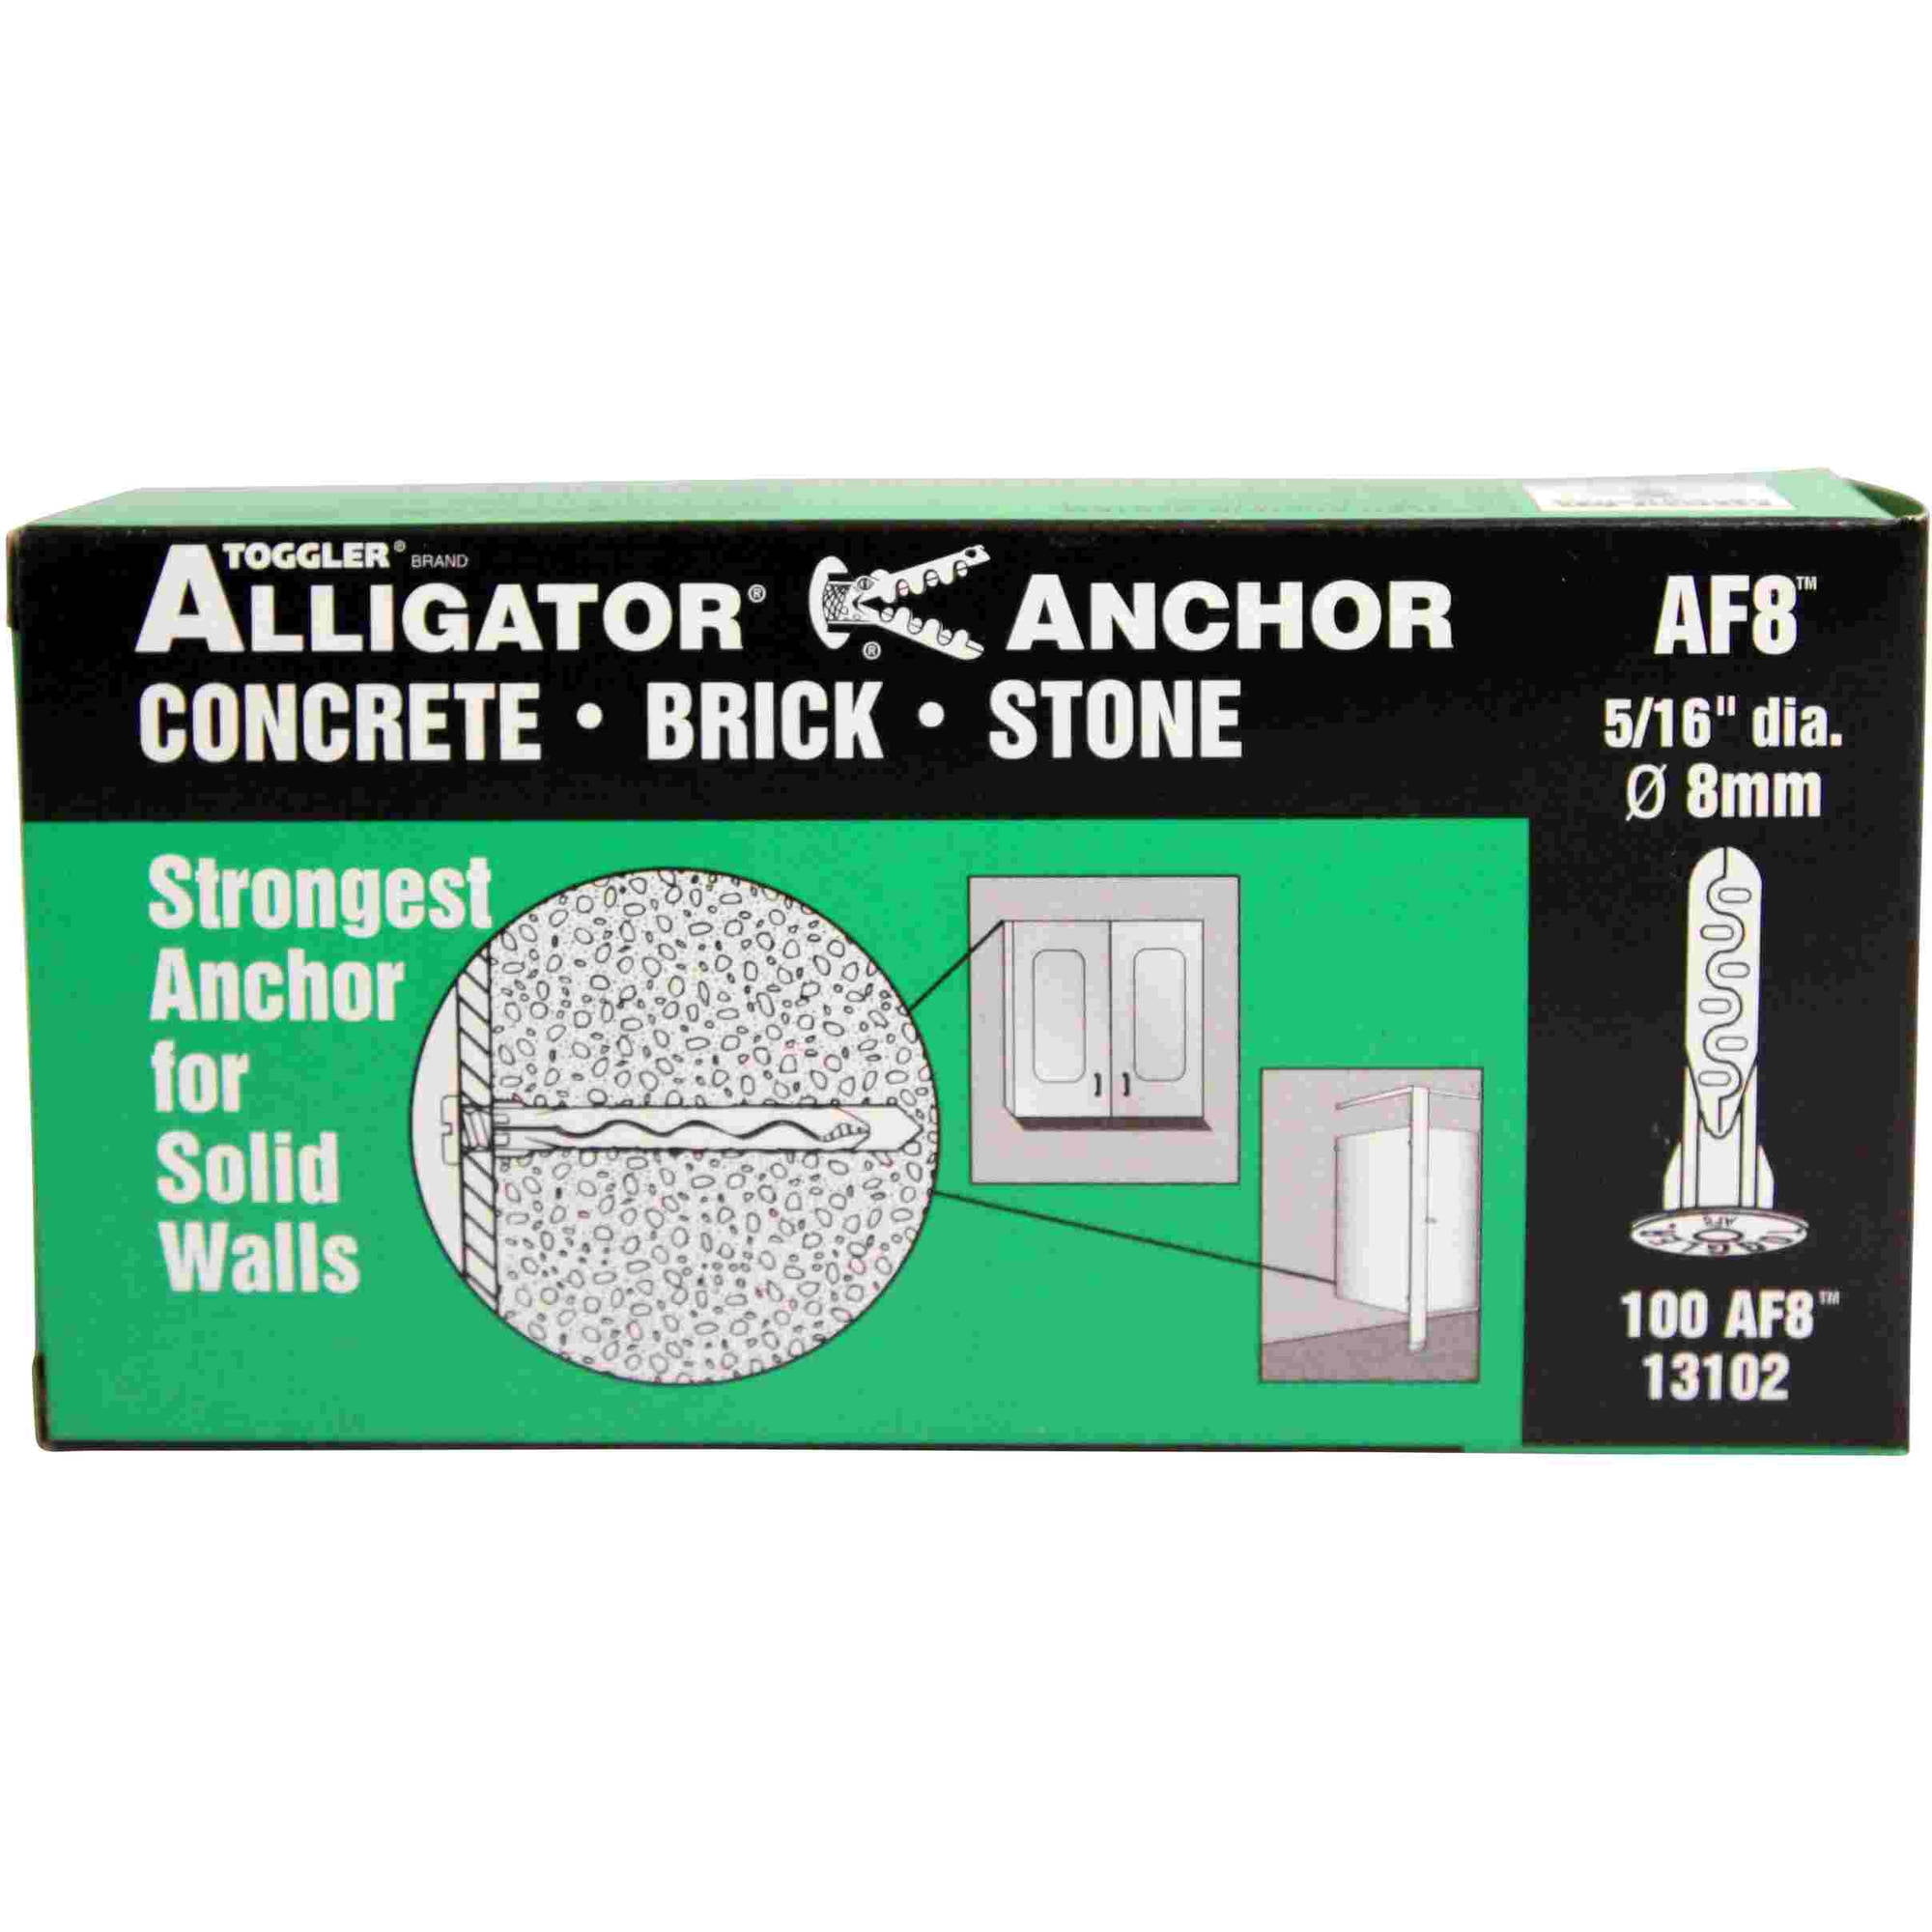 Toggler Alligator All Purpose Anchors, Af8Tm 100-Piece Box of 5/16 Dia.  Anchors with Flange, No Screws